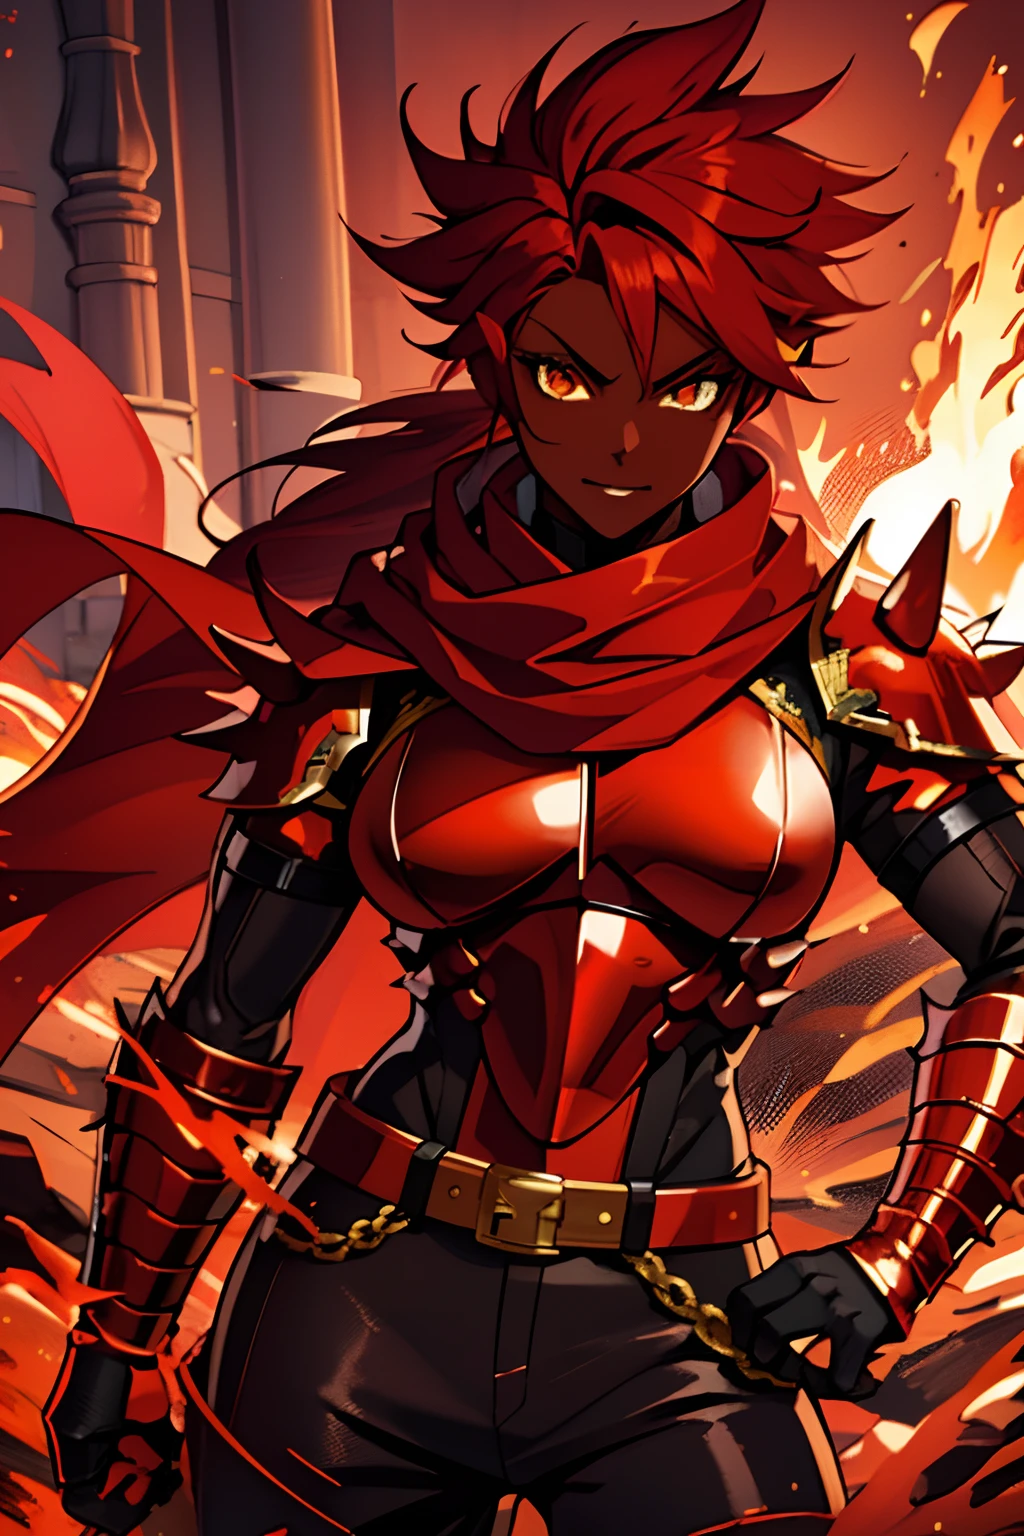 dark skin, red hair, orange dragon eyes, anime character with red cape and black outfit standing in front of a fire, female protagonist,  portrait of a female anime hero, badass anime 8 k, , armor girl, advanced digital anime art ”, portrait of female paladin, lady in red armor, key anime art,